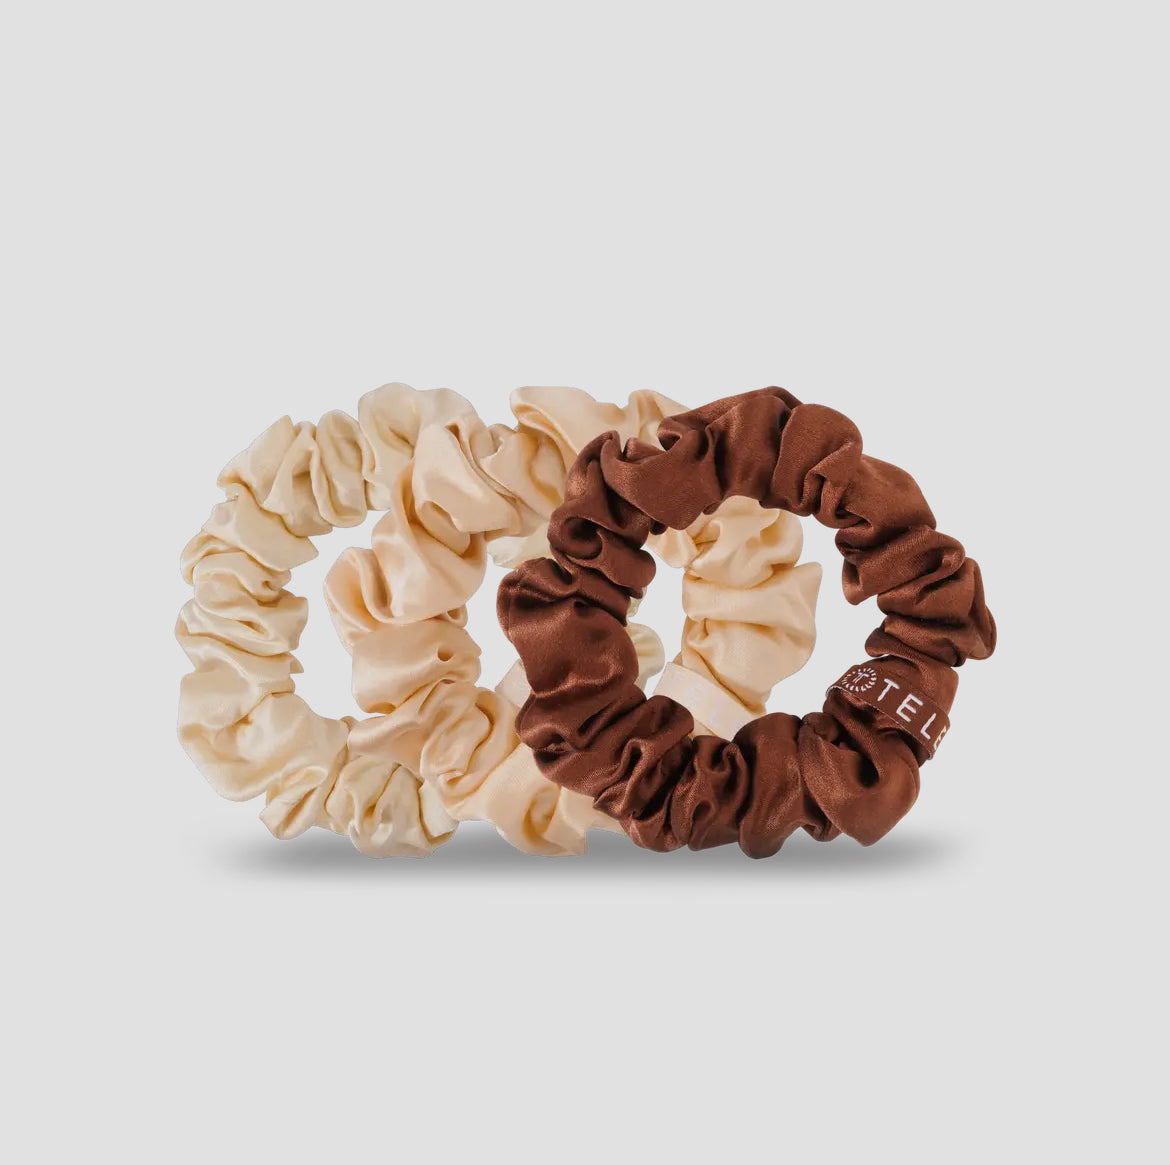 TELETIES: For the Love of Nudes Small Scrunchie